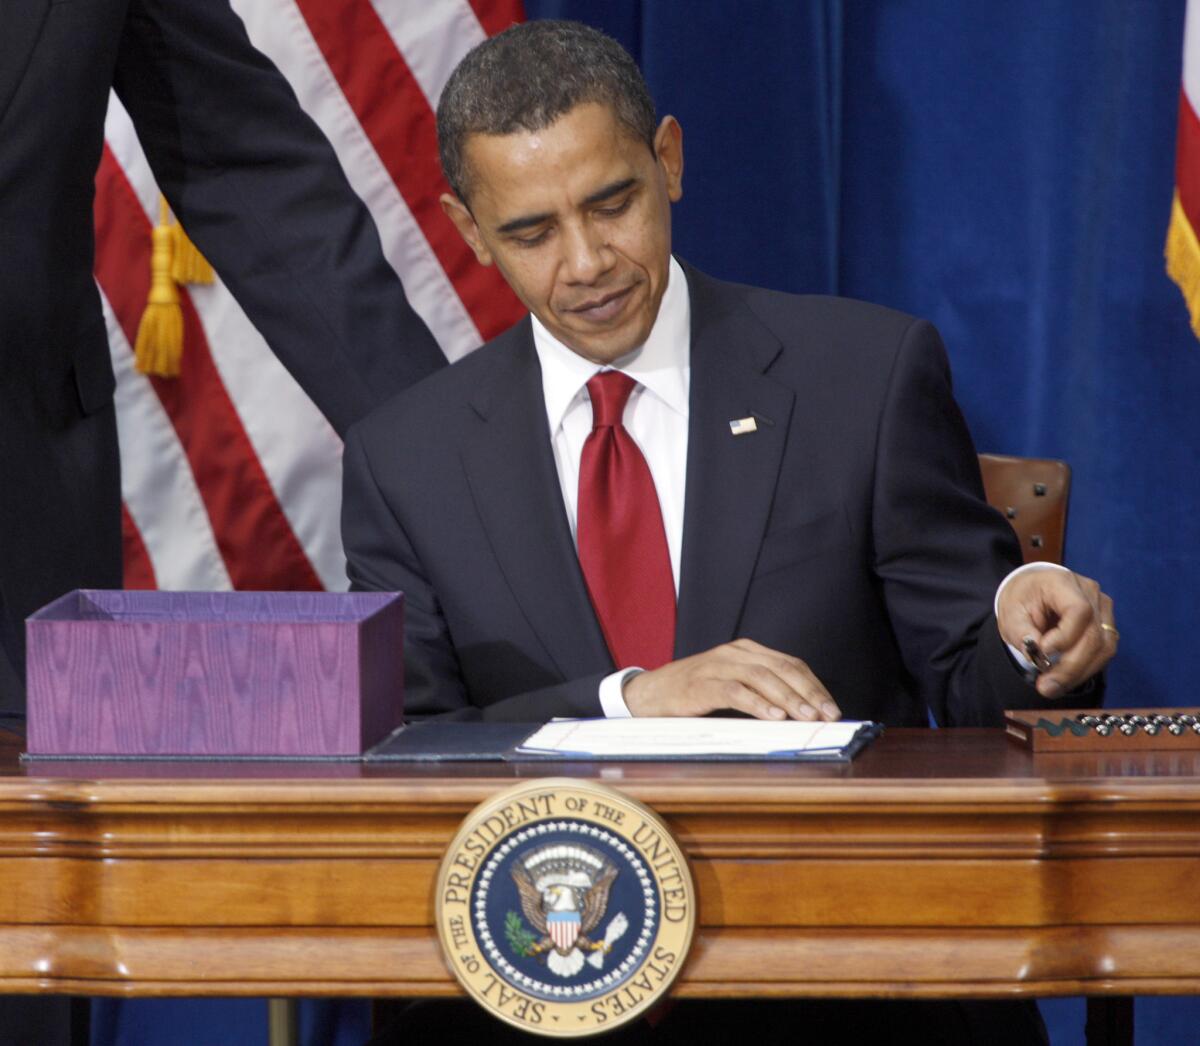 President Obama, in a file photo, picks up a pen to sign the economic stimulus bill.